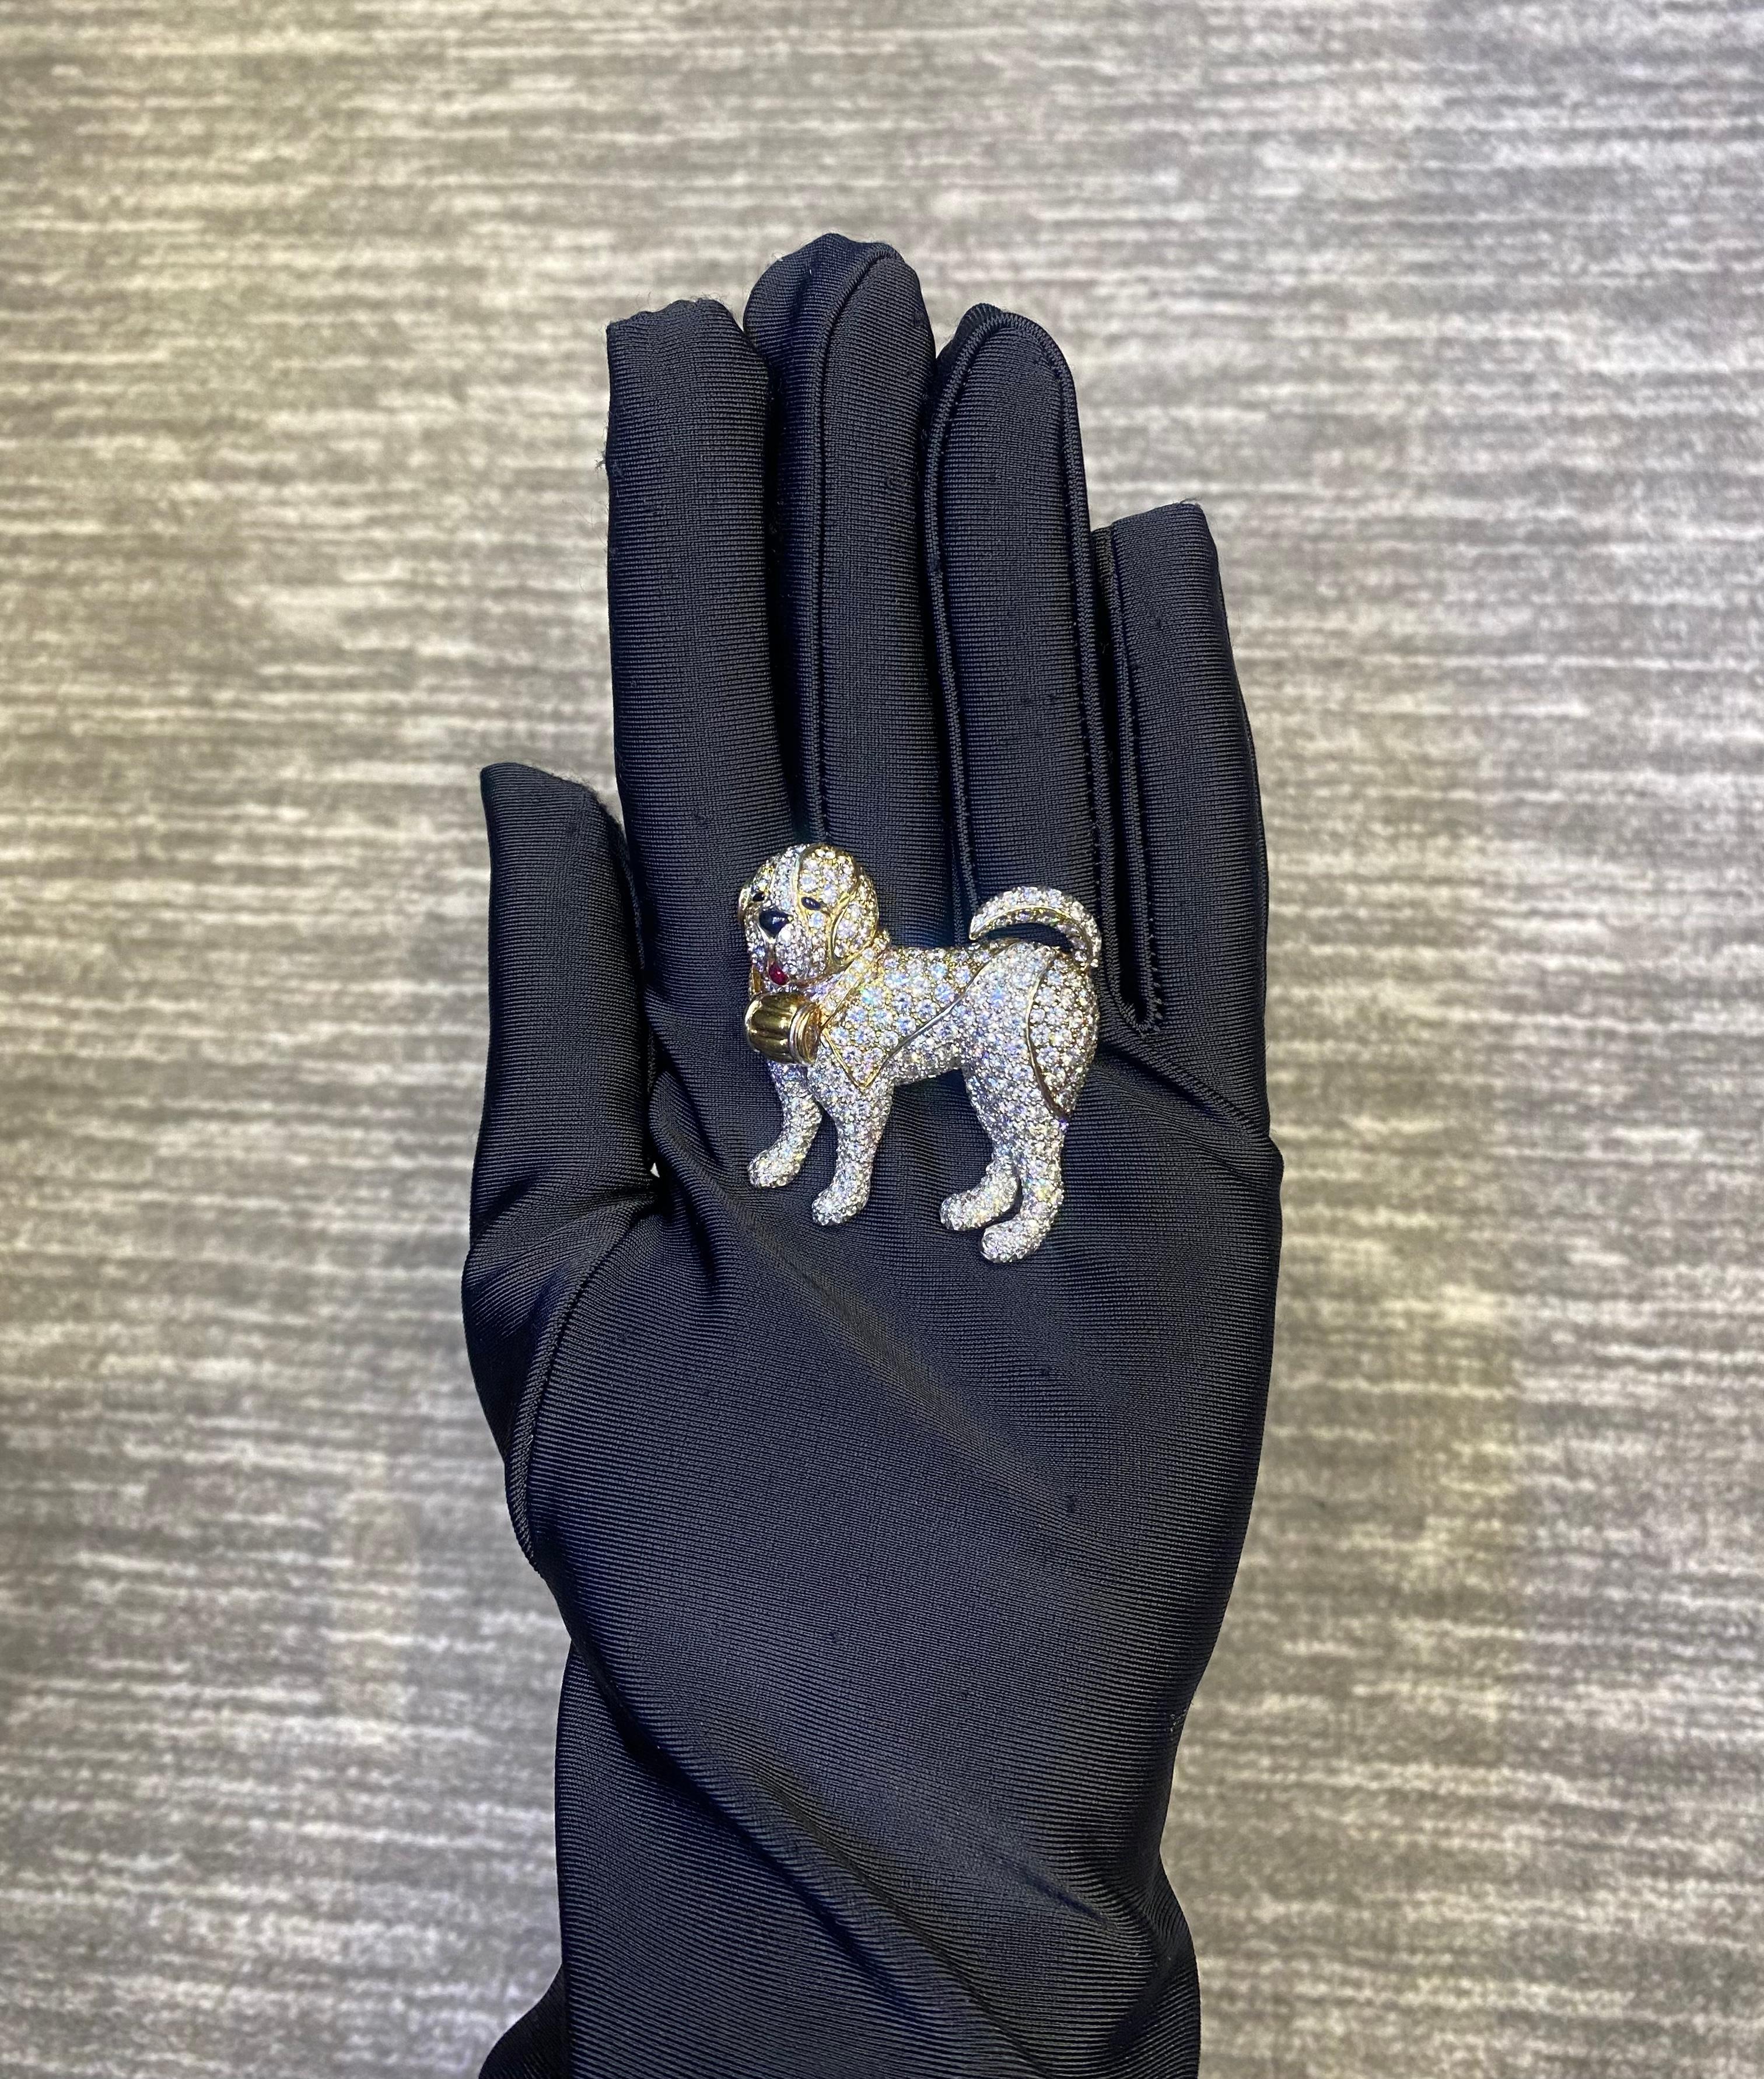  Van Cleef & Arpels Diamond Dog Brooch In Excellent Condition For Sale In New York, NY